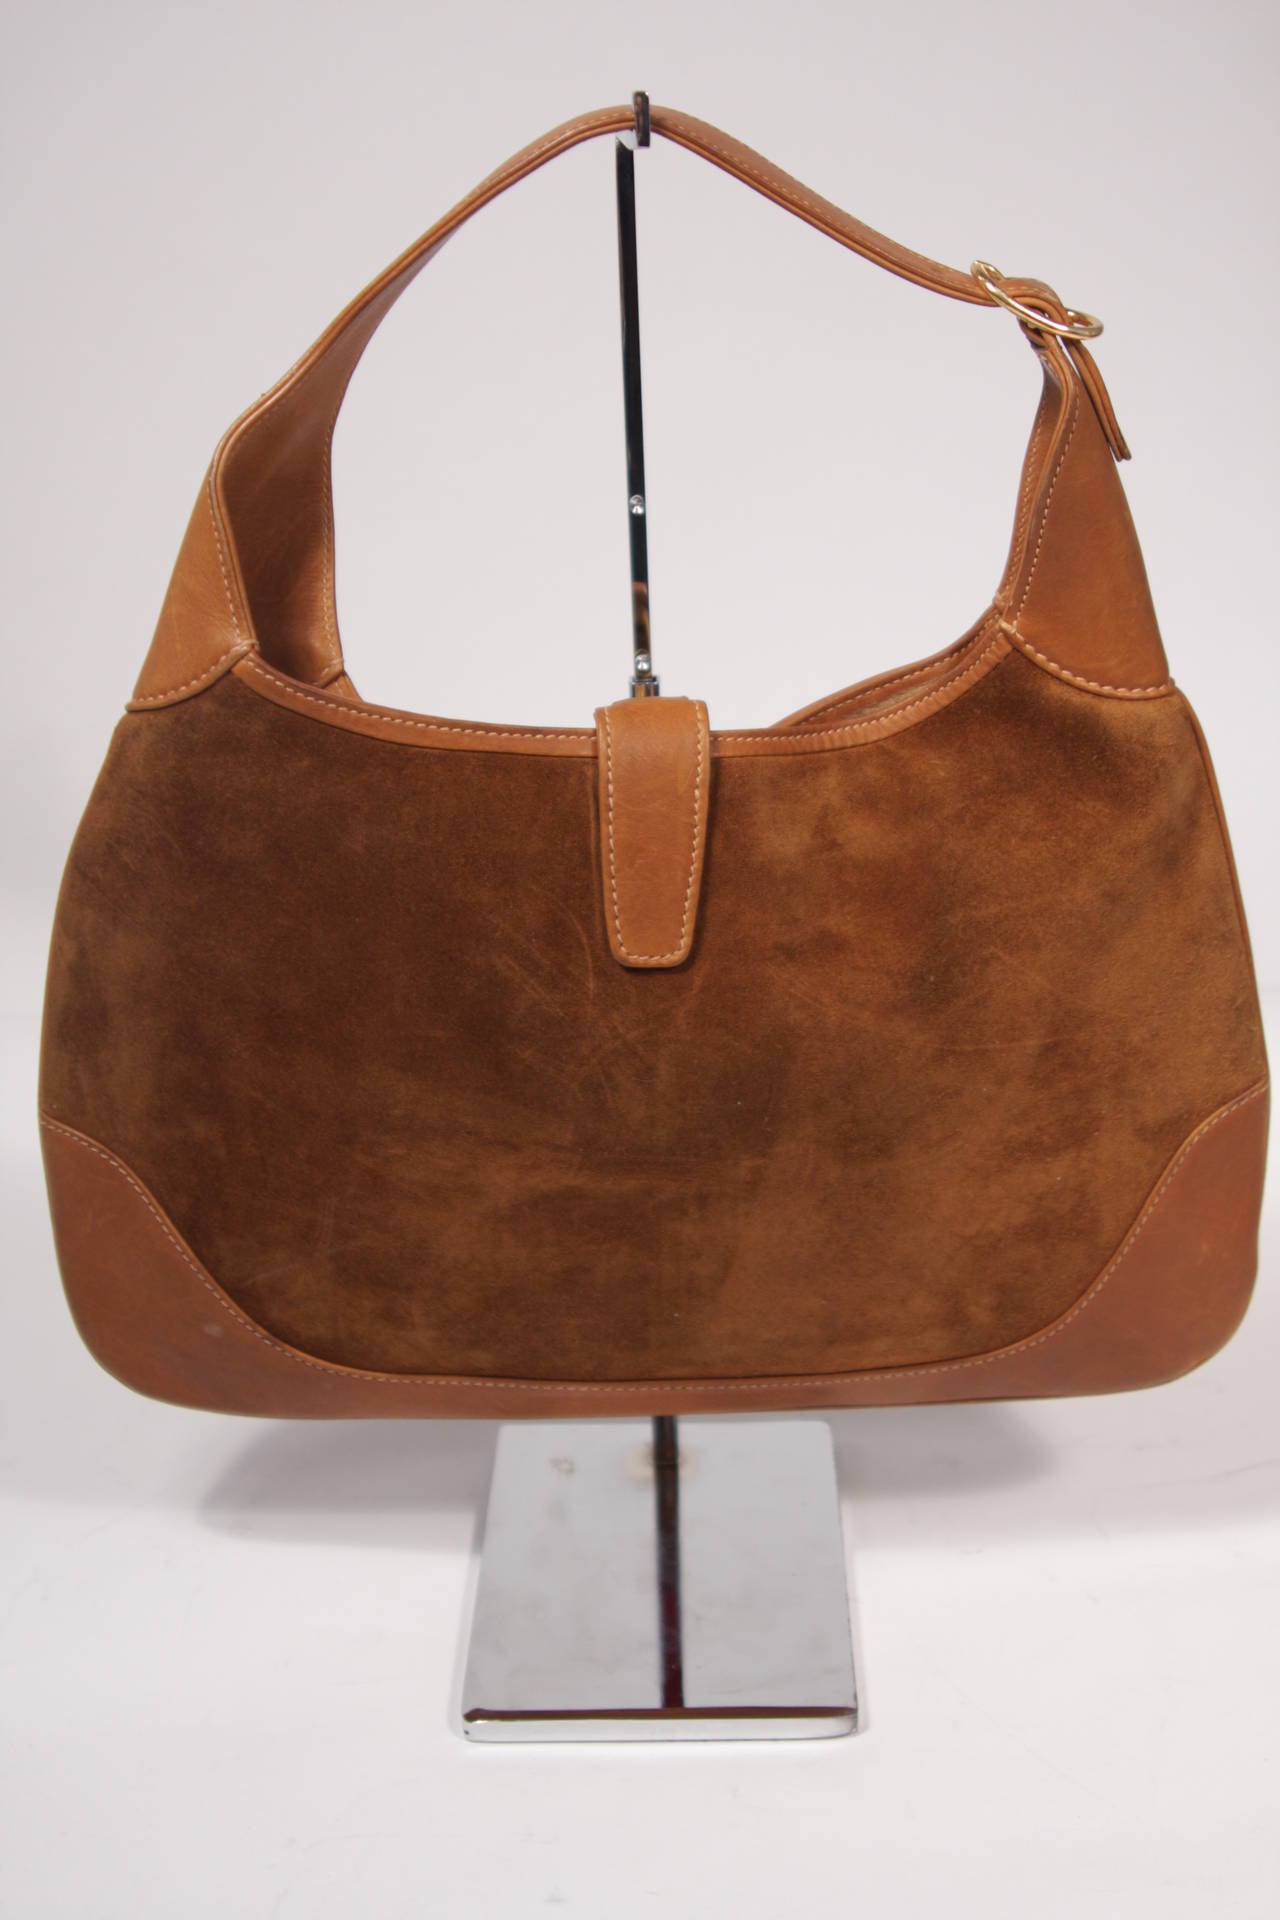 Gucci Large Brown Suede Hobo with Gold Hardware 3